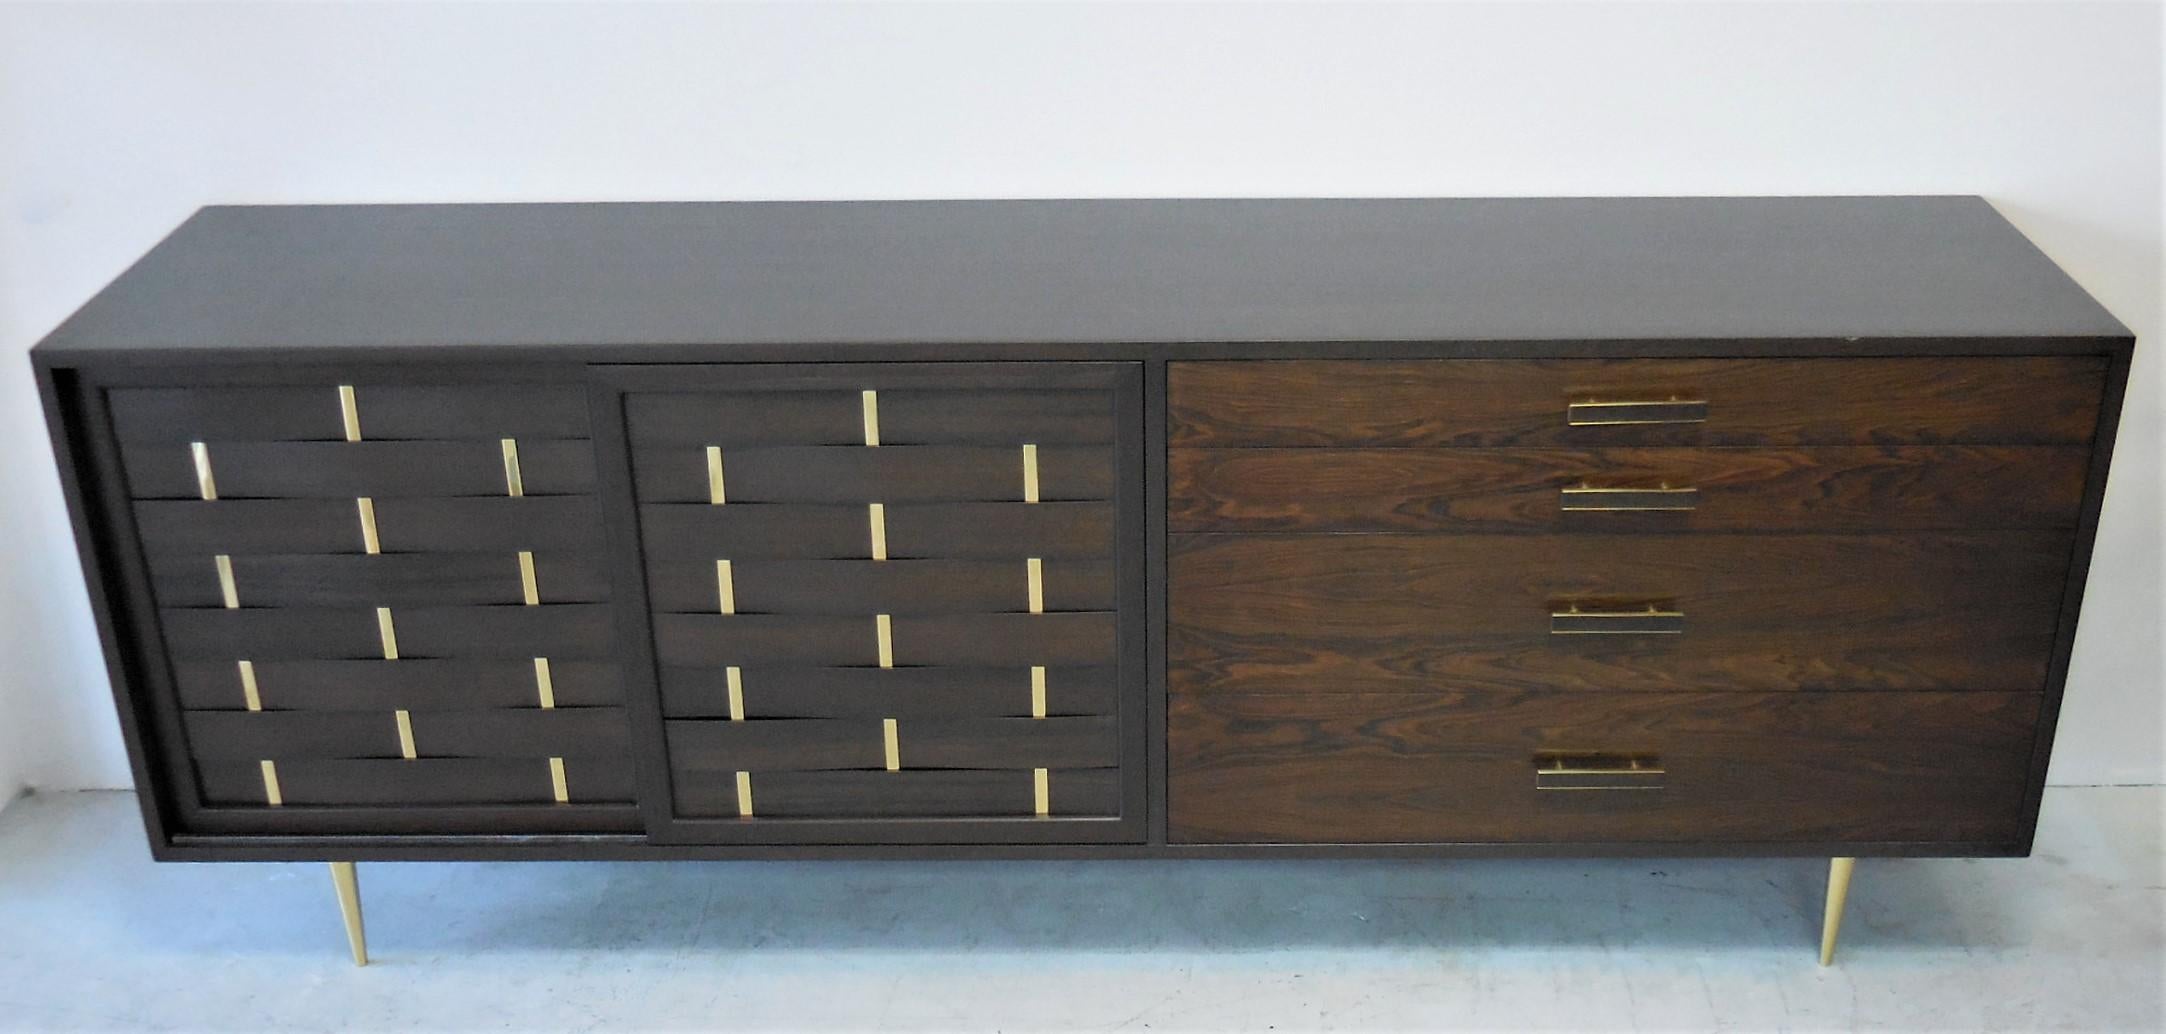 Exquisite midcentury sideboard or console by Harvey Probber. The simple but well proportioned design is accented by brass elements positioned in the right places. Two webbed wood and brass doors conceal 4 sliding trays lined with cork. Four drawers